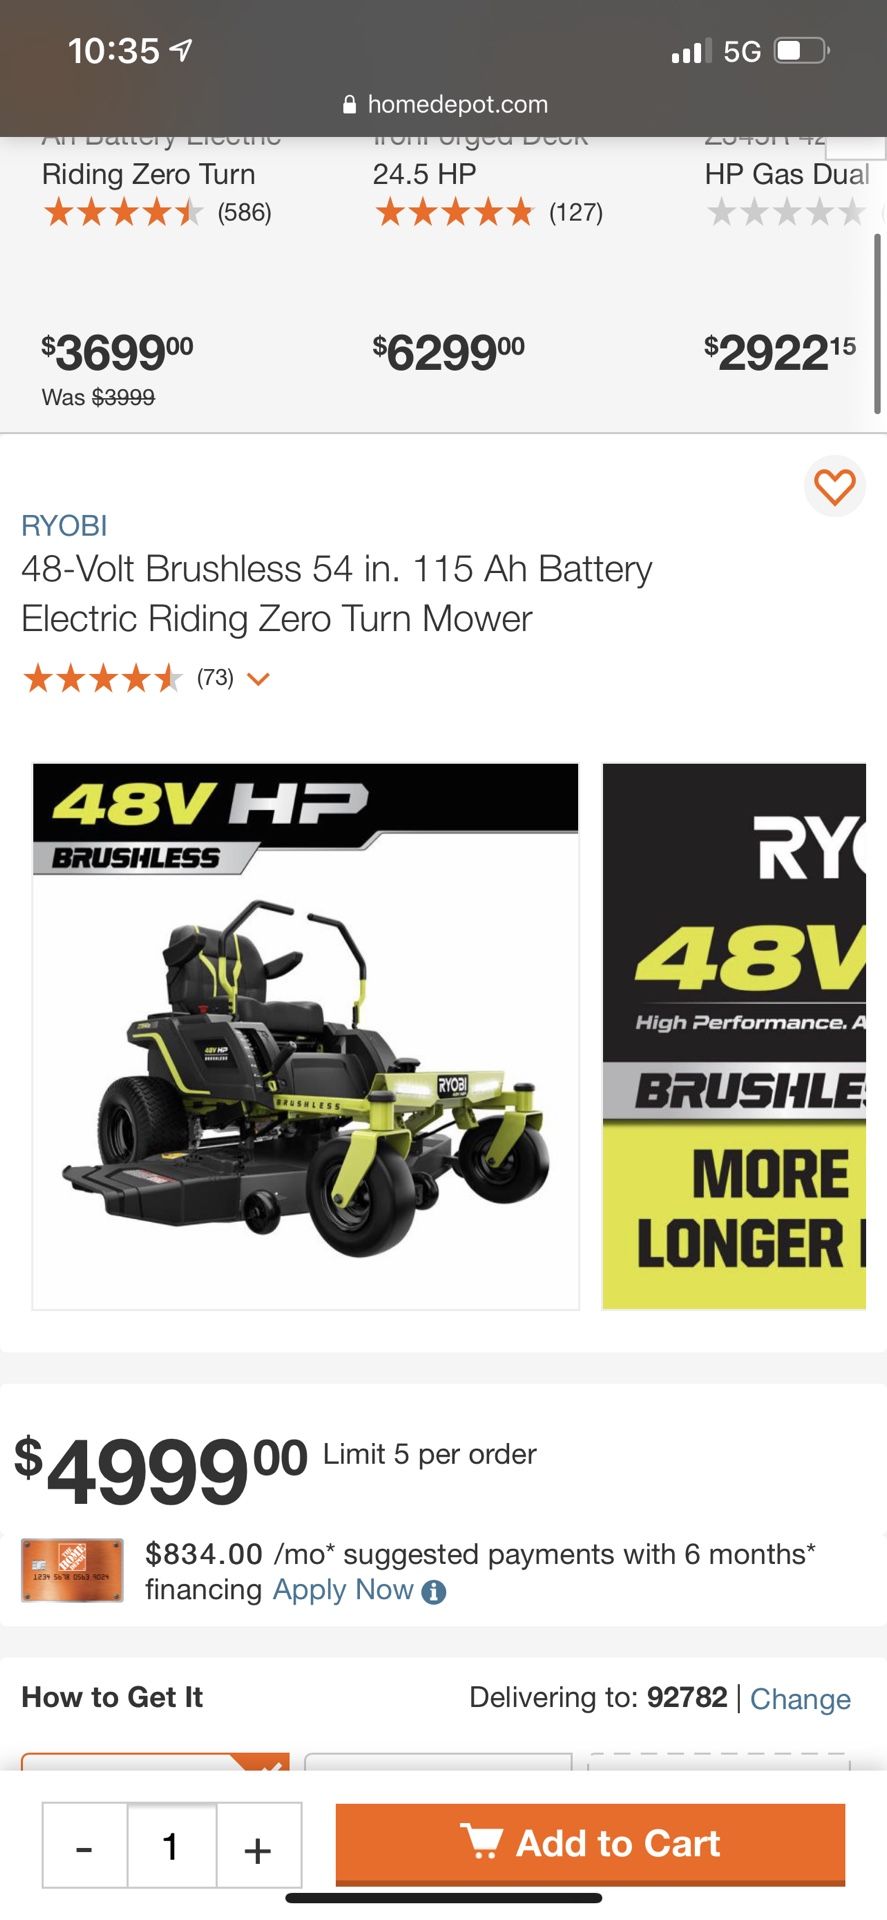 48-Volt Brushless 54 in. 115 Ah Battery Electric Riding Zero Turn Mower